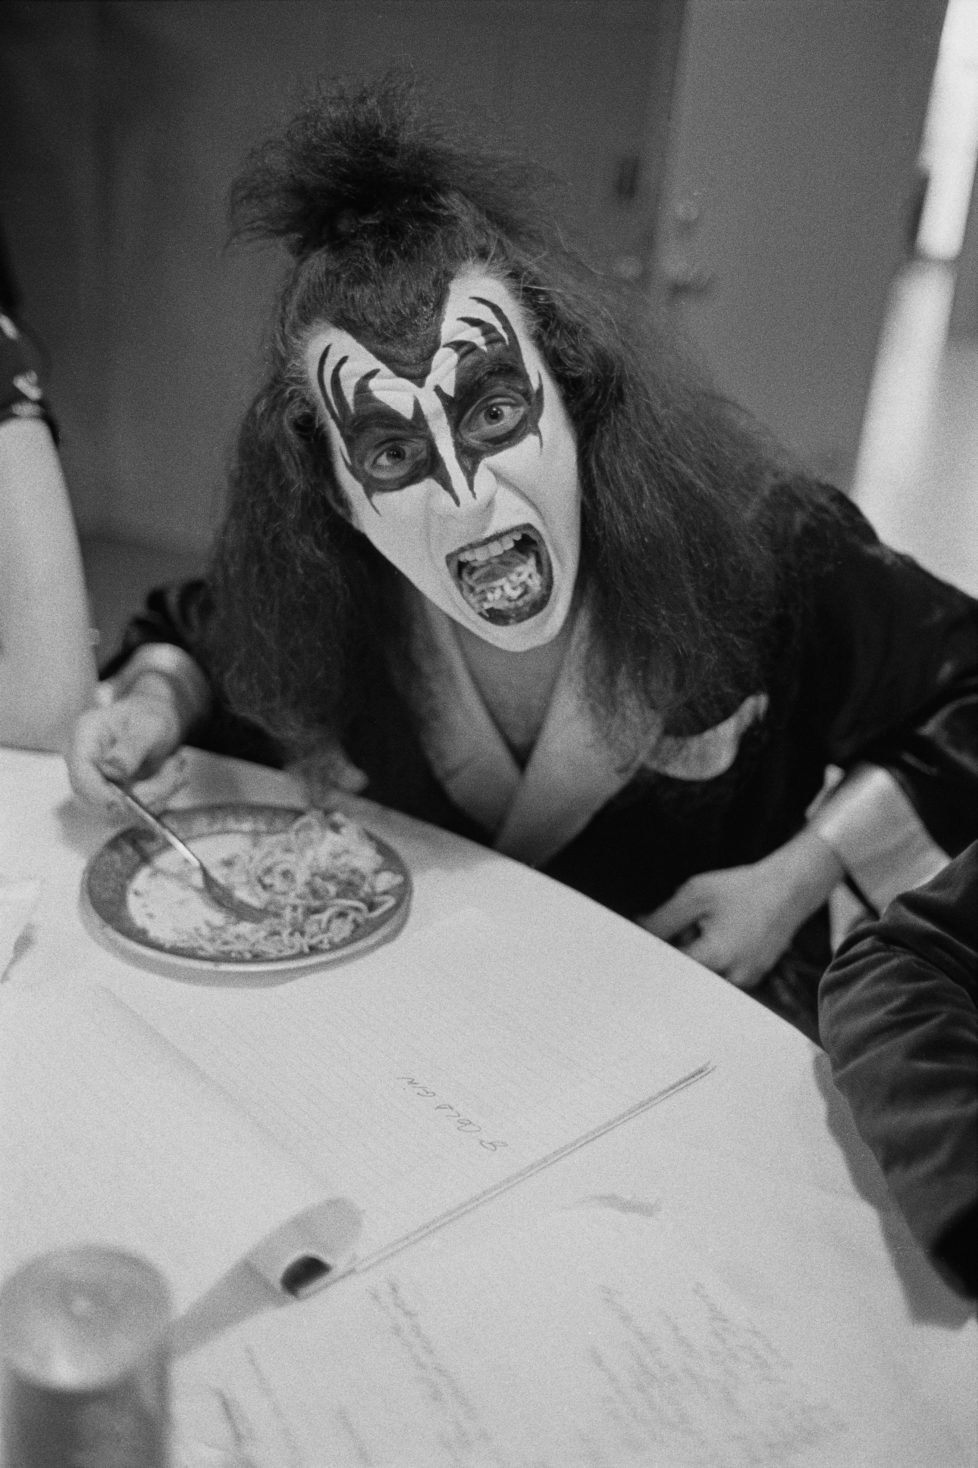 DETROIT, USA - 16th MAY: Bassist Gene Simmons from rock group Kiss posed eating a plate of Spaghetti backstage at Cobo Hall in Detroit during the concert recording of Alive! on 16th May 1975. (Photo by Fin Costello/Redferns)